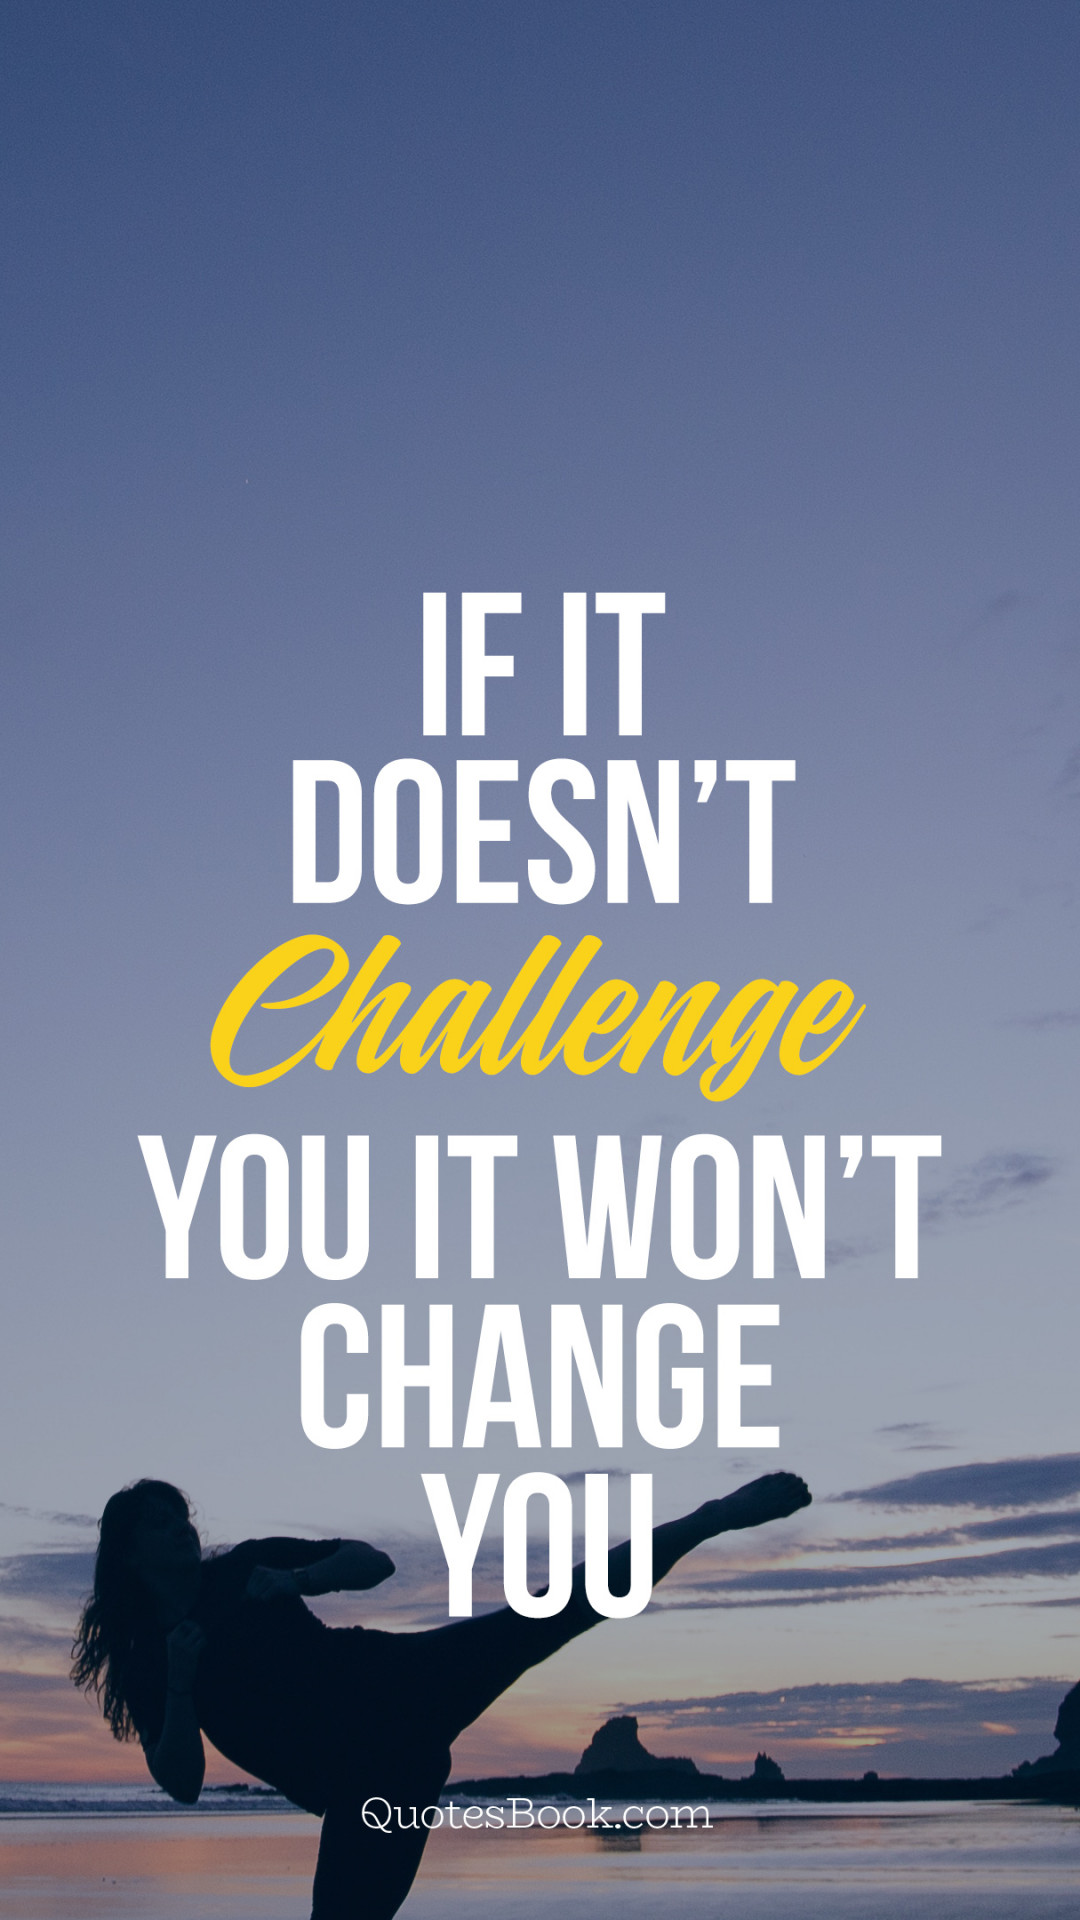 If it doesn’t challenge you it won’t change you - QuotesBook